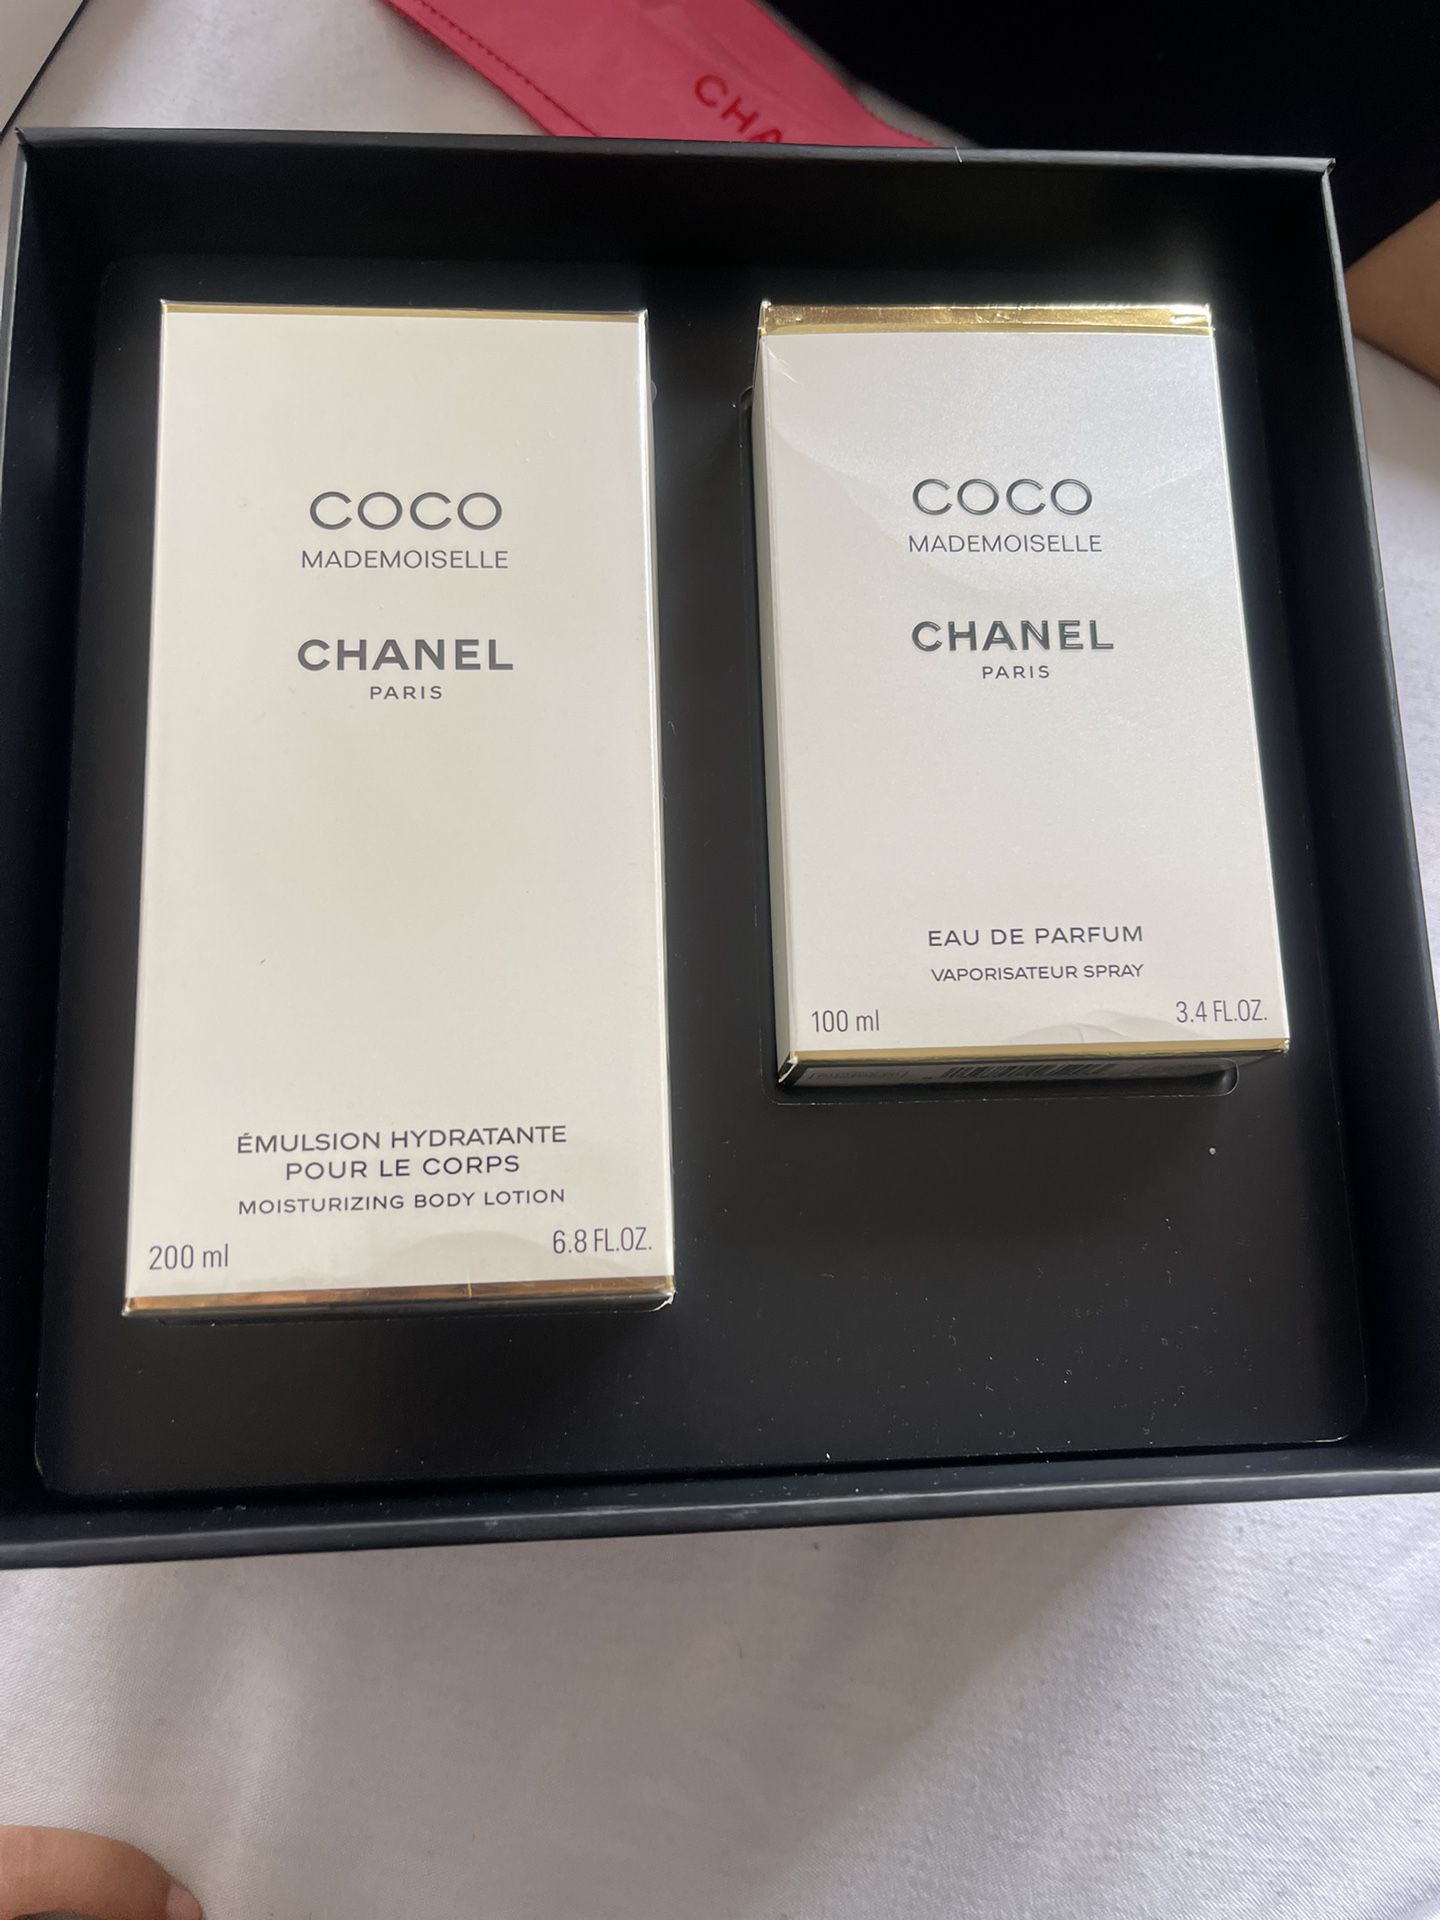 chanel coco mademoiselle perfume 6.8 oz for Sale in Los Angeles